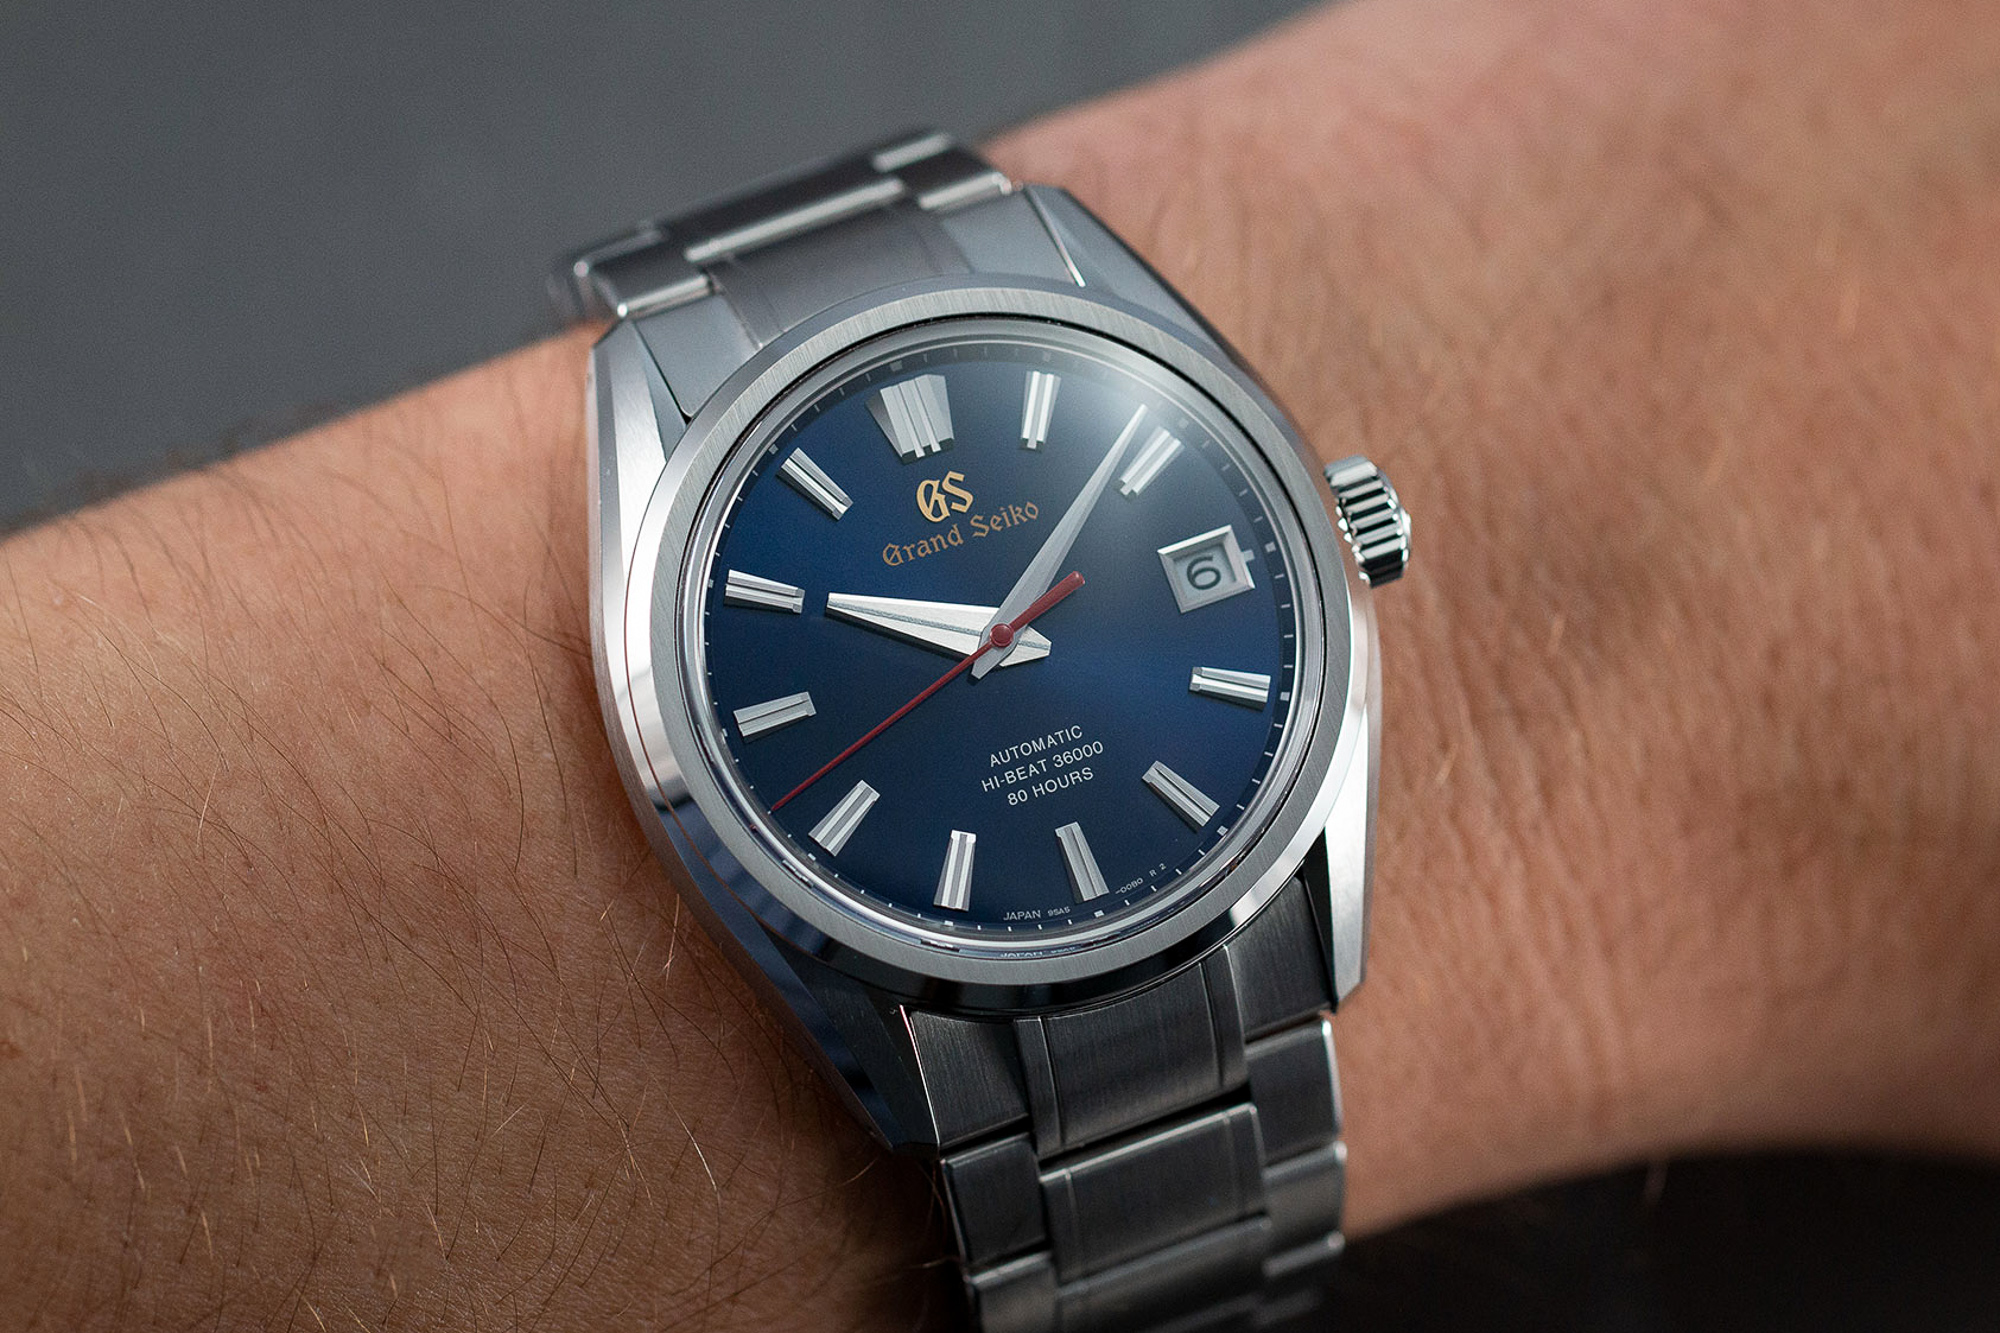 Grand Seiko SLGH003 blue dial stainless steel wristwatch on a wrist.